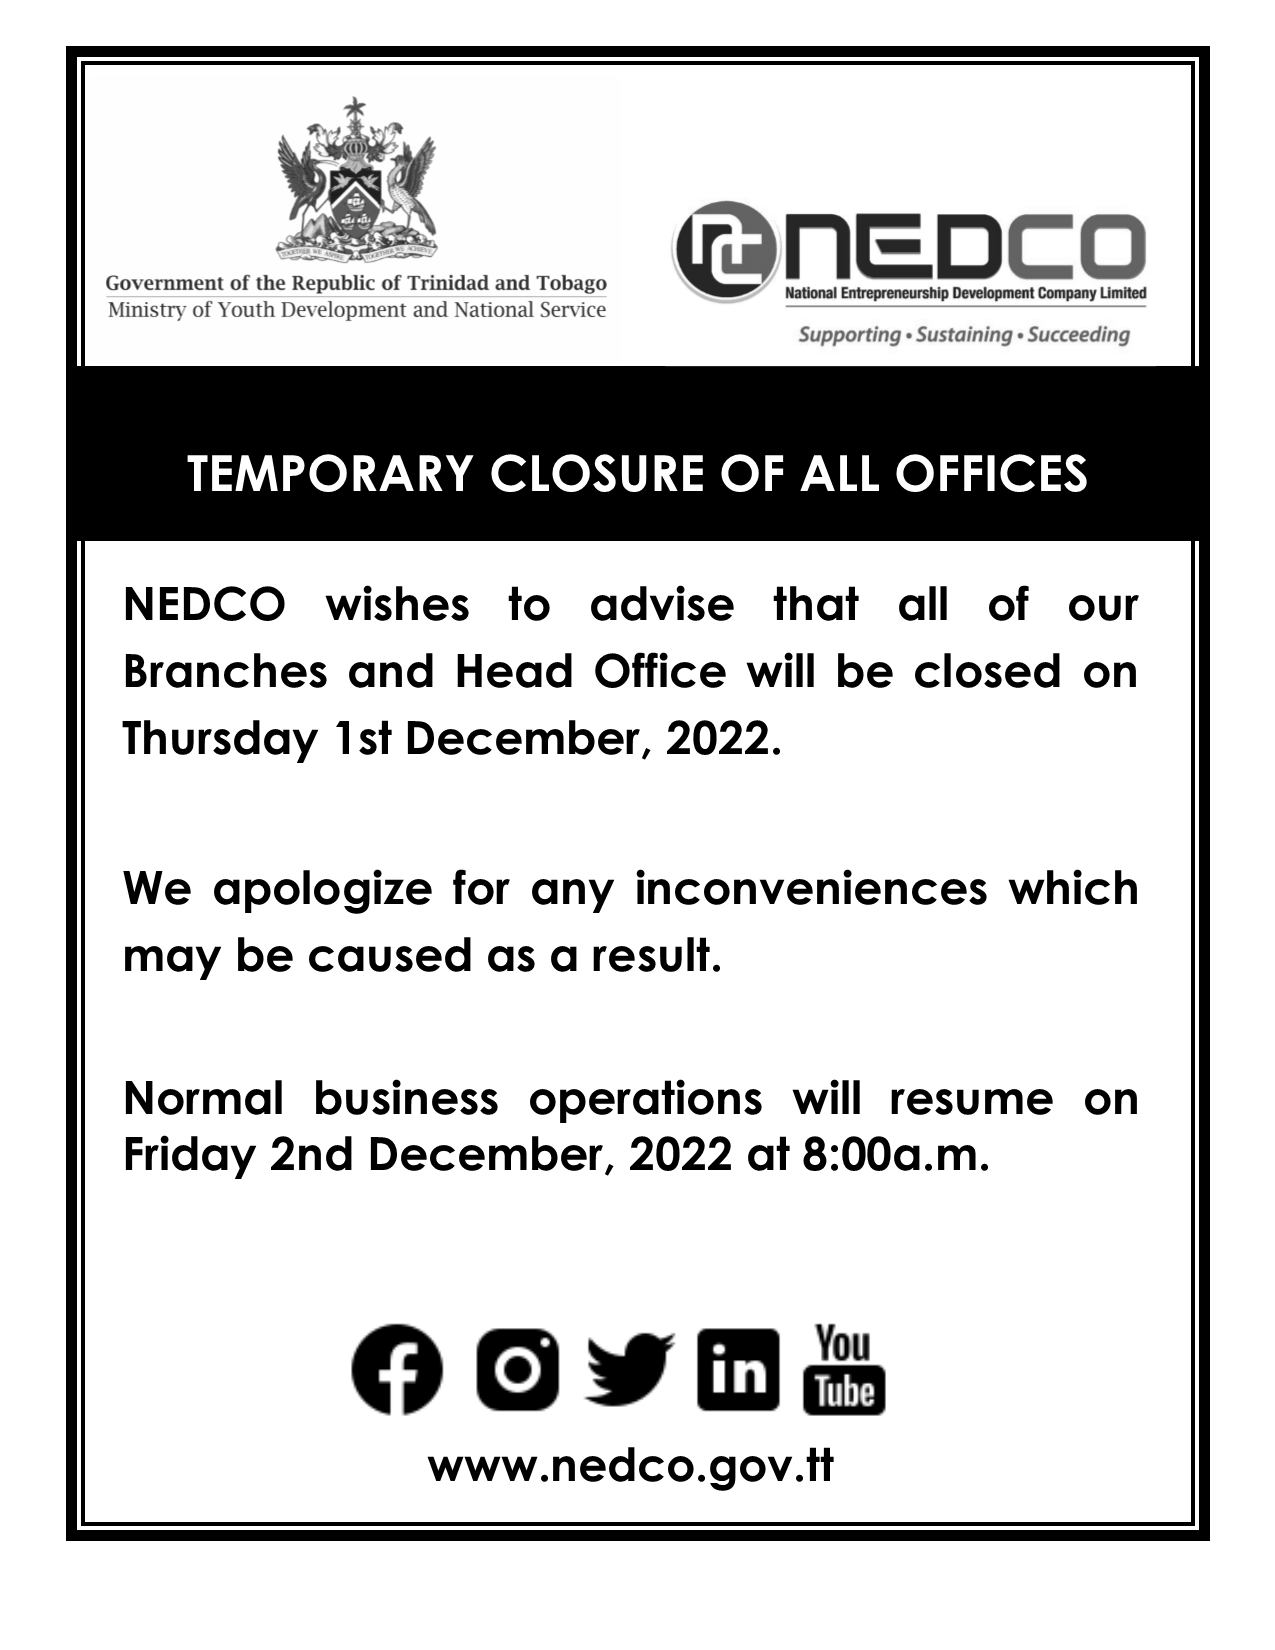 TEMPORARY CLOSURE OF NEDCO OFFICES